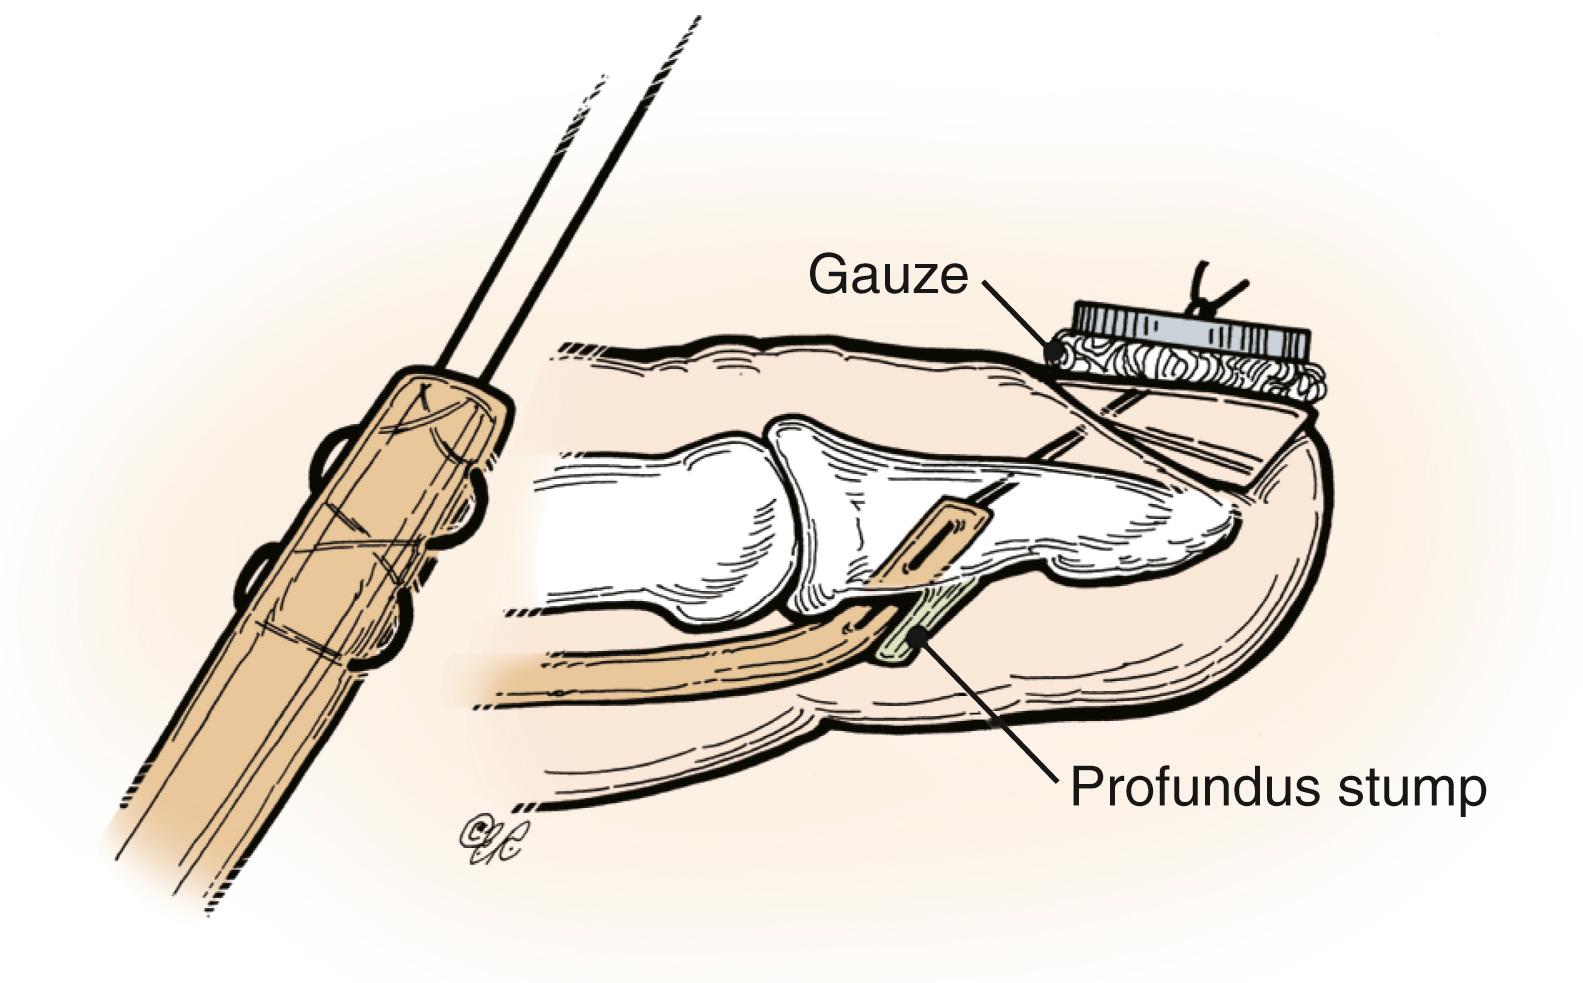 Fig. 6.6, Modified Bunnell distal juncture technique. Pull-out sutures are passed through the distal phalanx.